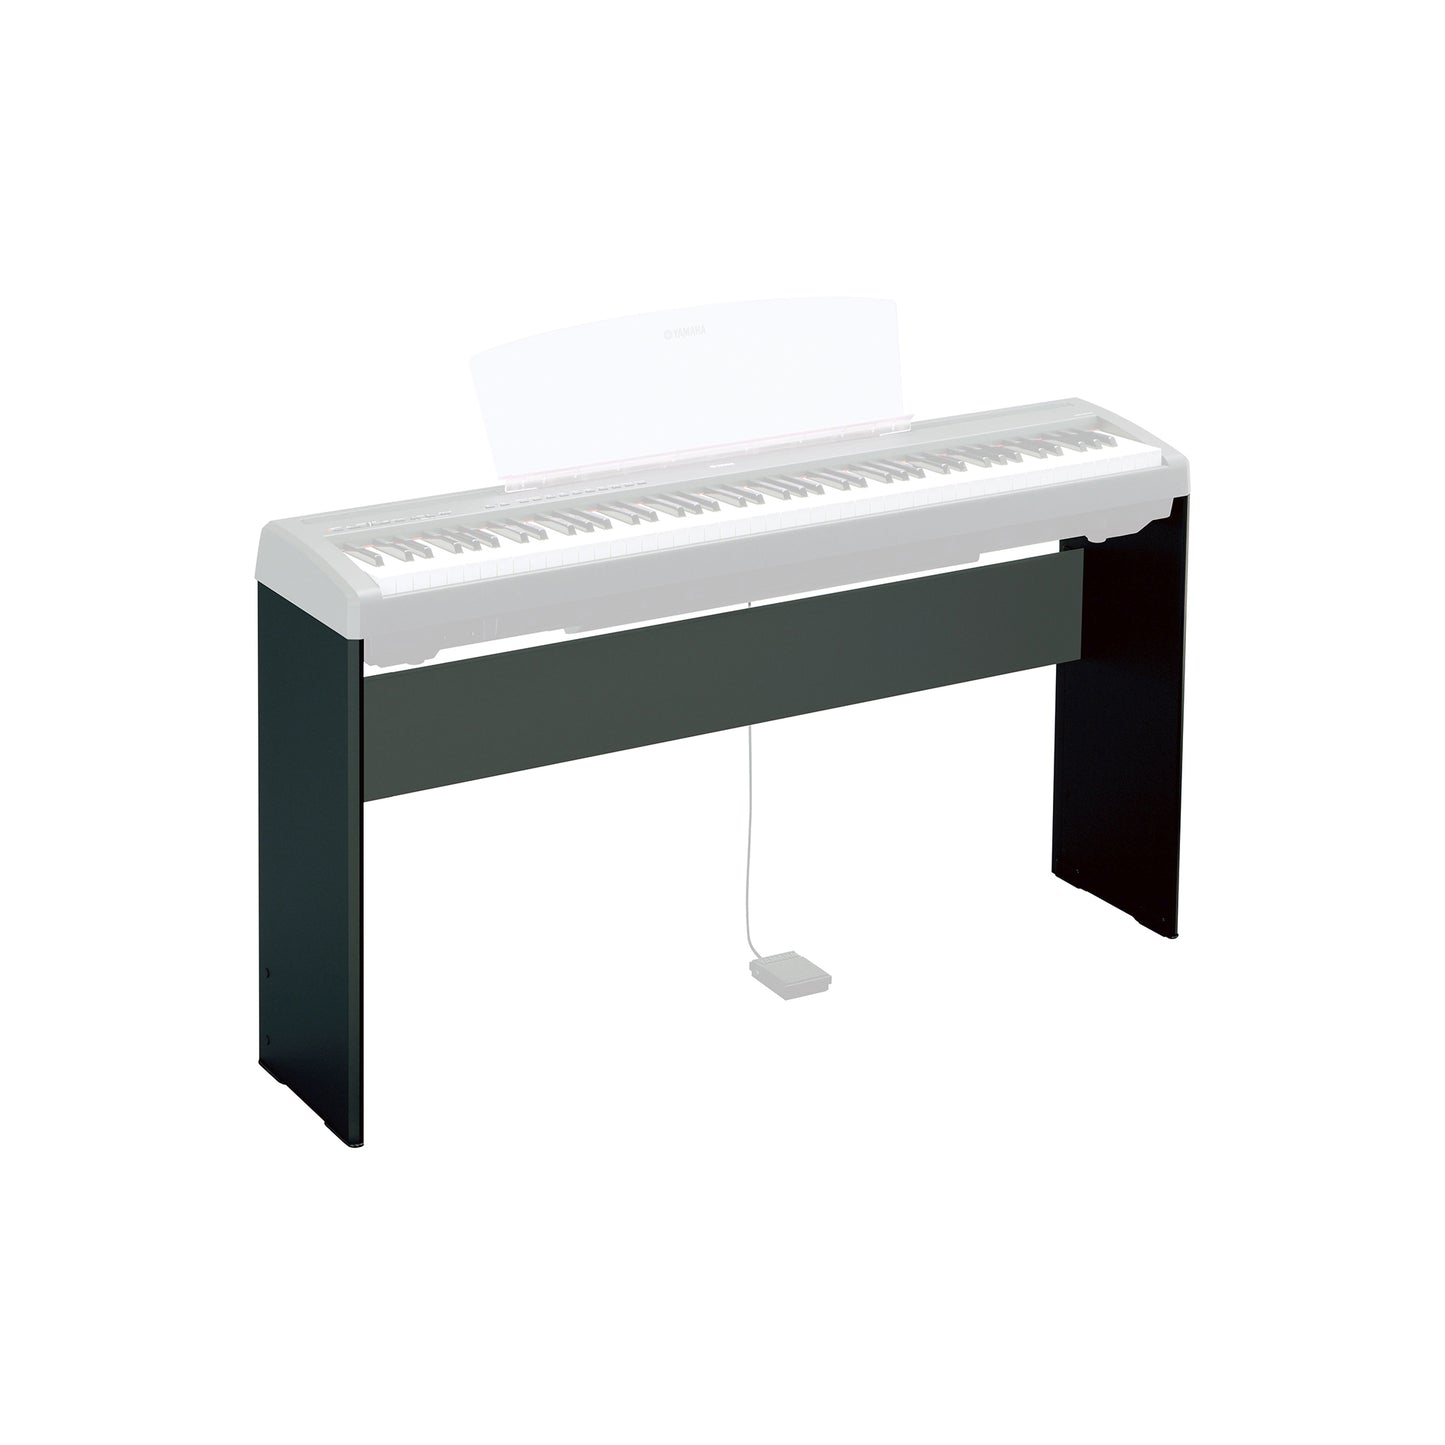 Yamaha L-85 Keyboard Stand for P-Series Digital Pianos